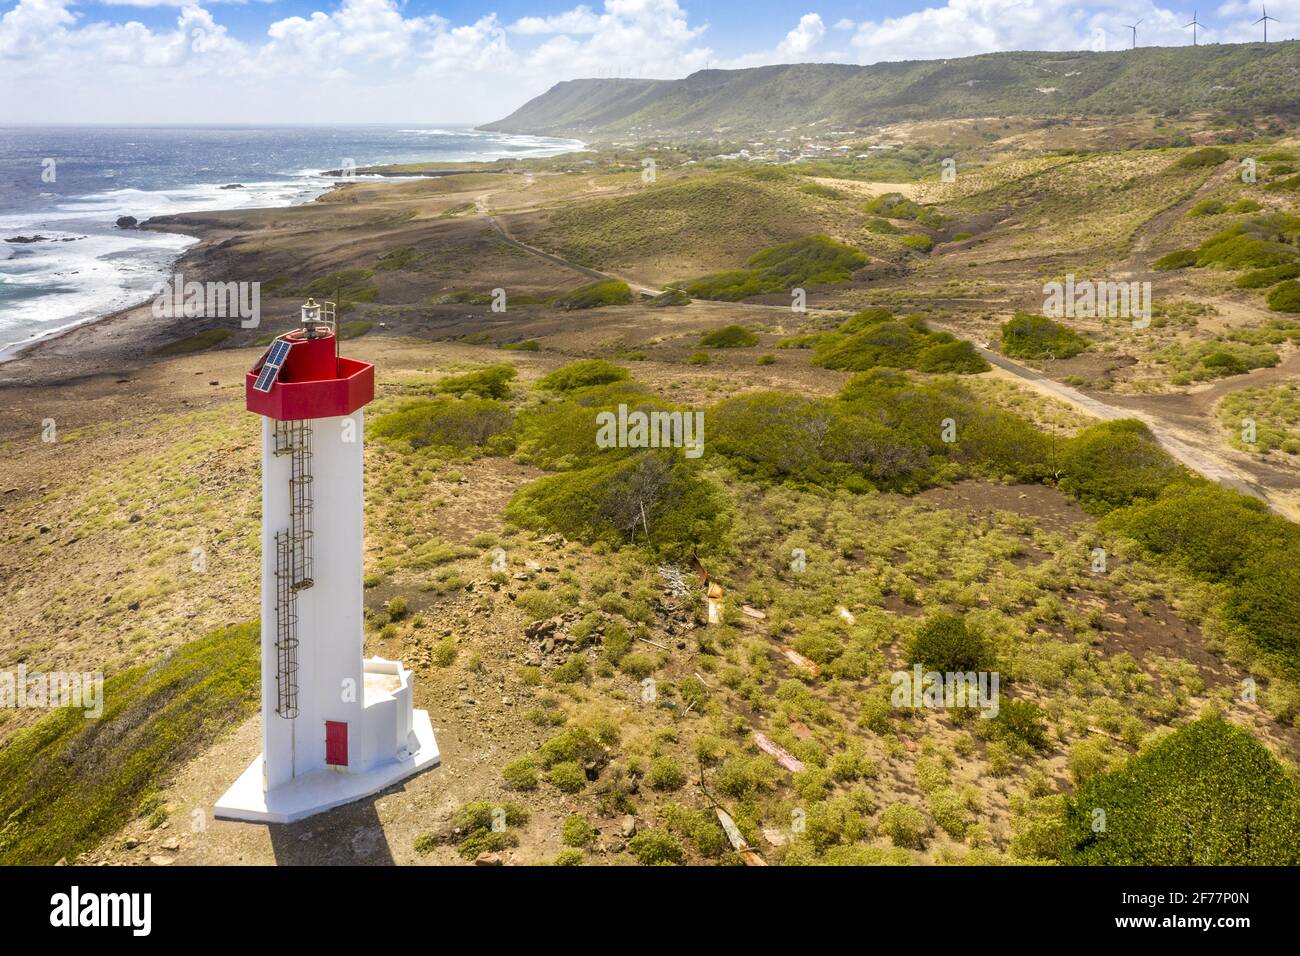 France, Caribbean, French West Indies, Guadeloupe, Island of La Désirade, lighthouse of Pointe Mancenillier, National Nature Reserve of La Désirade Stock Photo